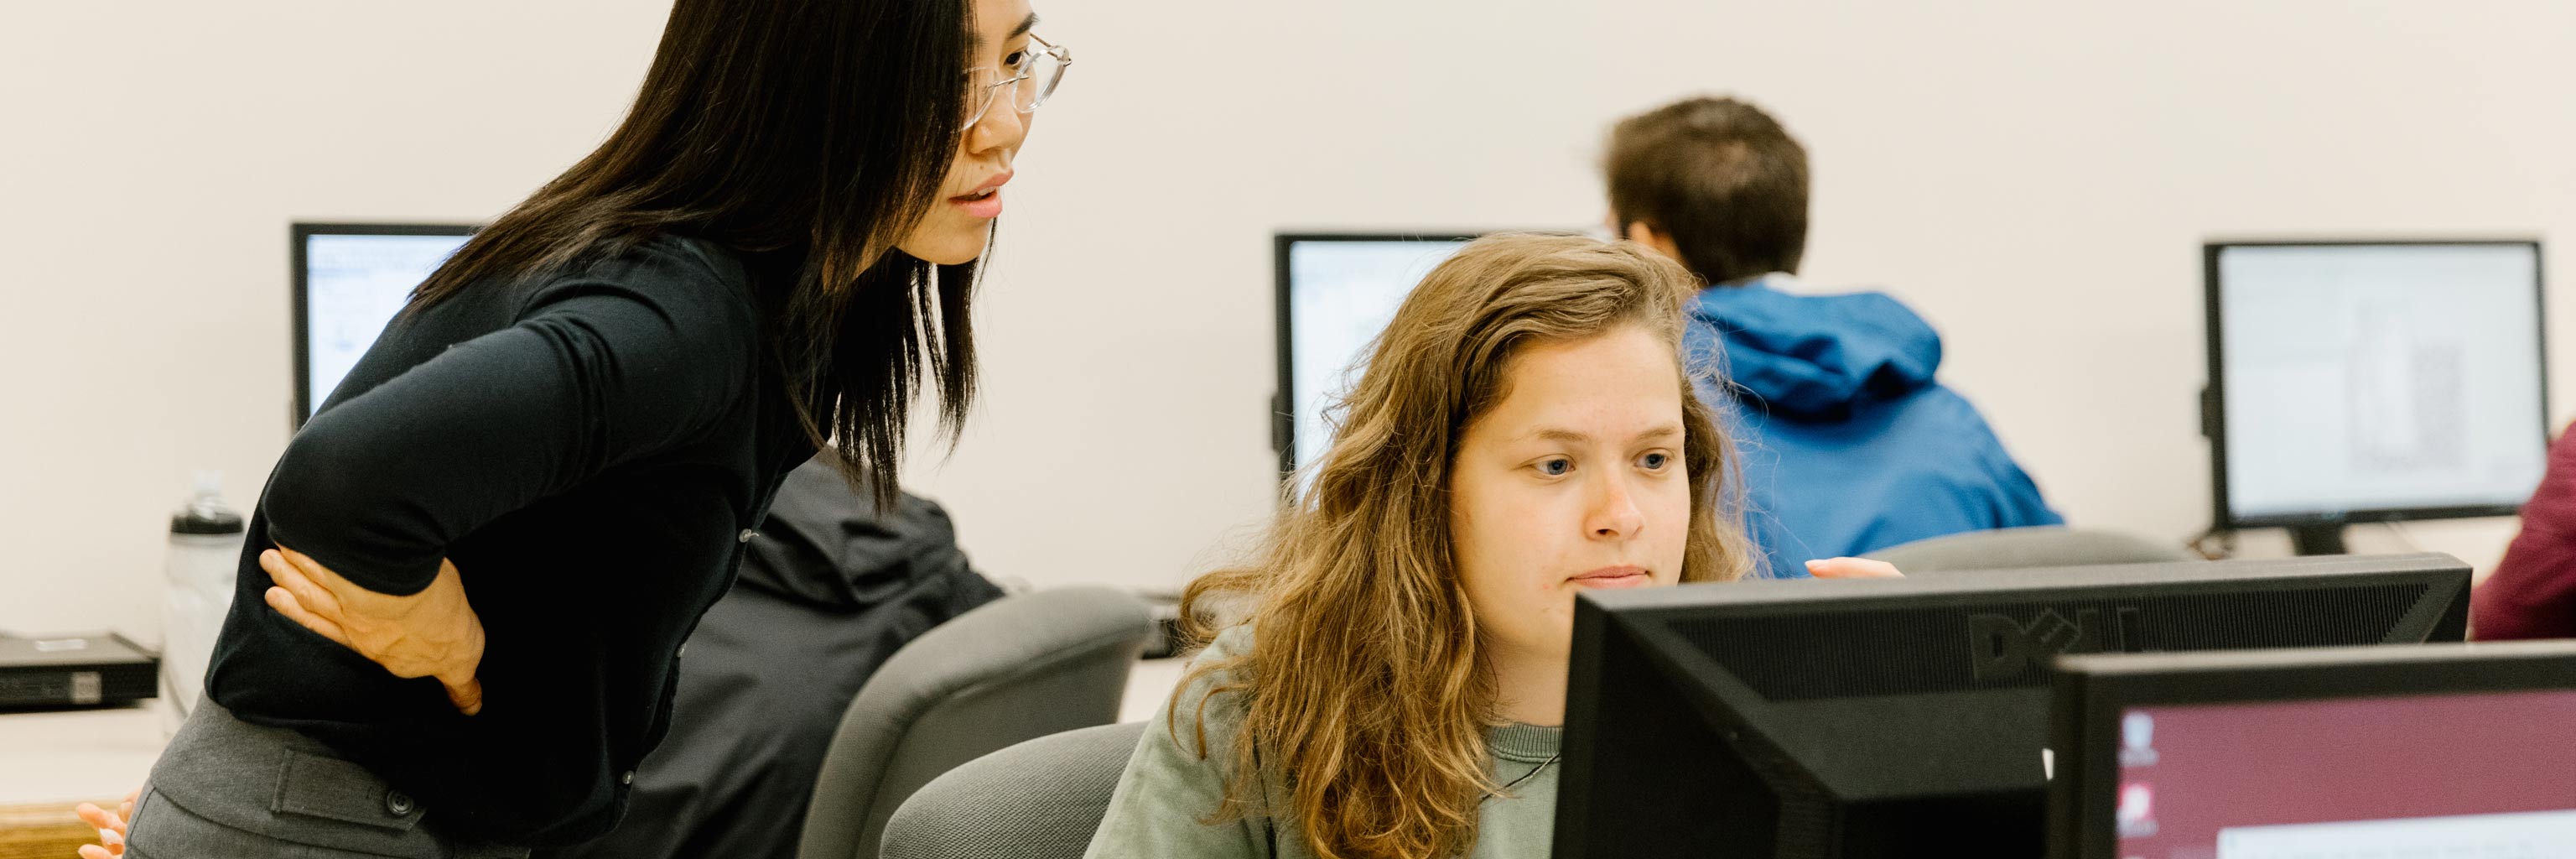 Instructor helping a student at a computer workstation 